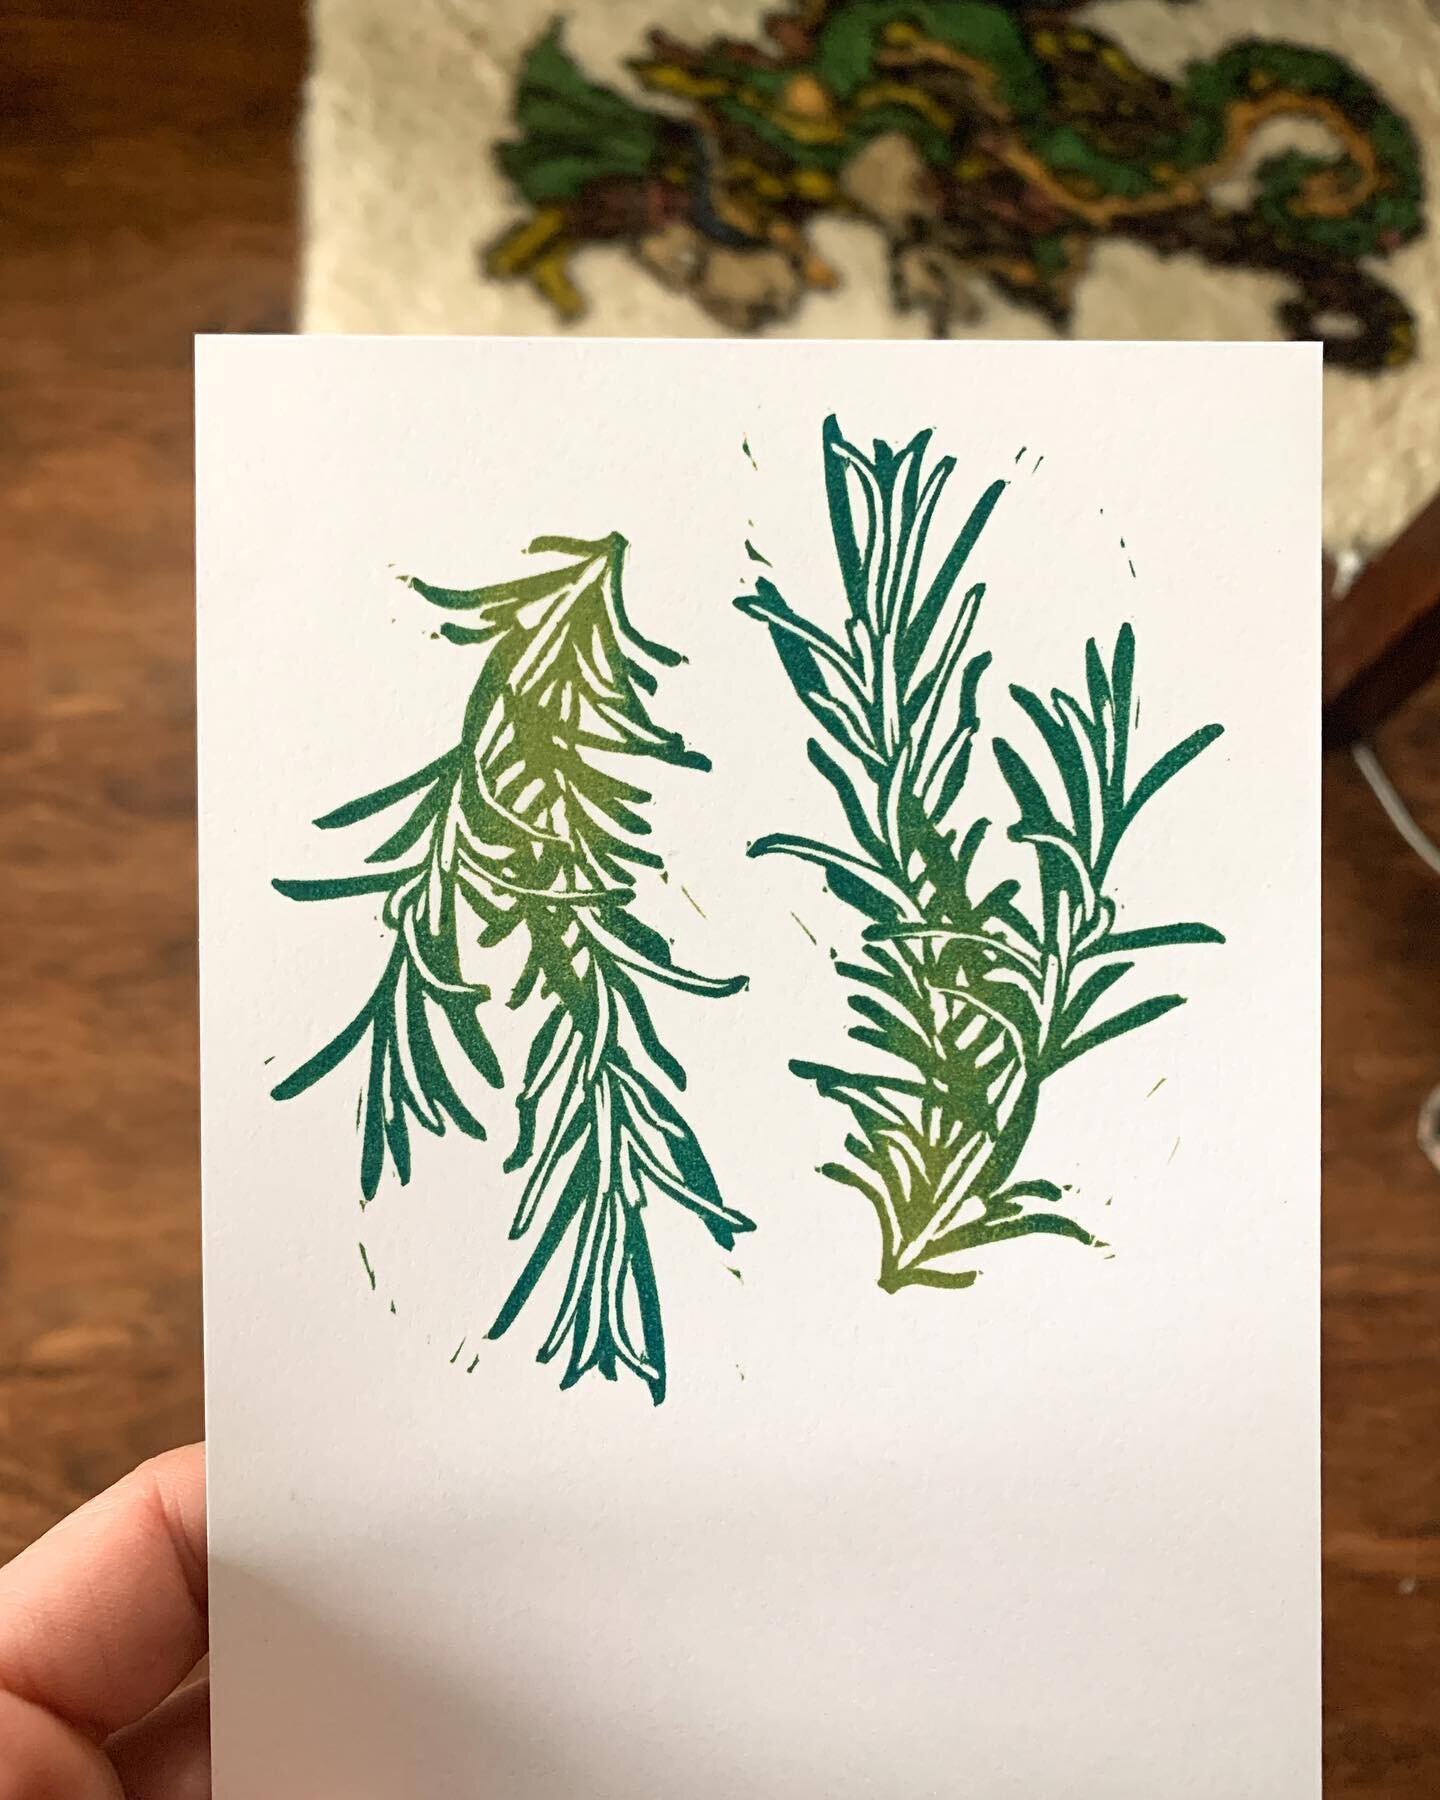 Name these plants.

In an effort to combine my stamp carving projects and paintings into one place, I&rsquo;m going to start sharing some of the carving projects I work on. @vvstamps was fun but my two halves need to be one.

#stampcarving #handcarve